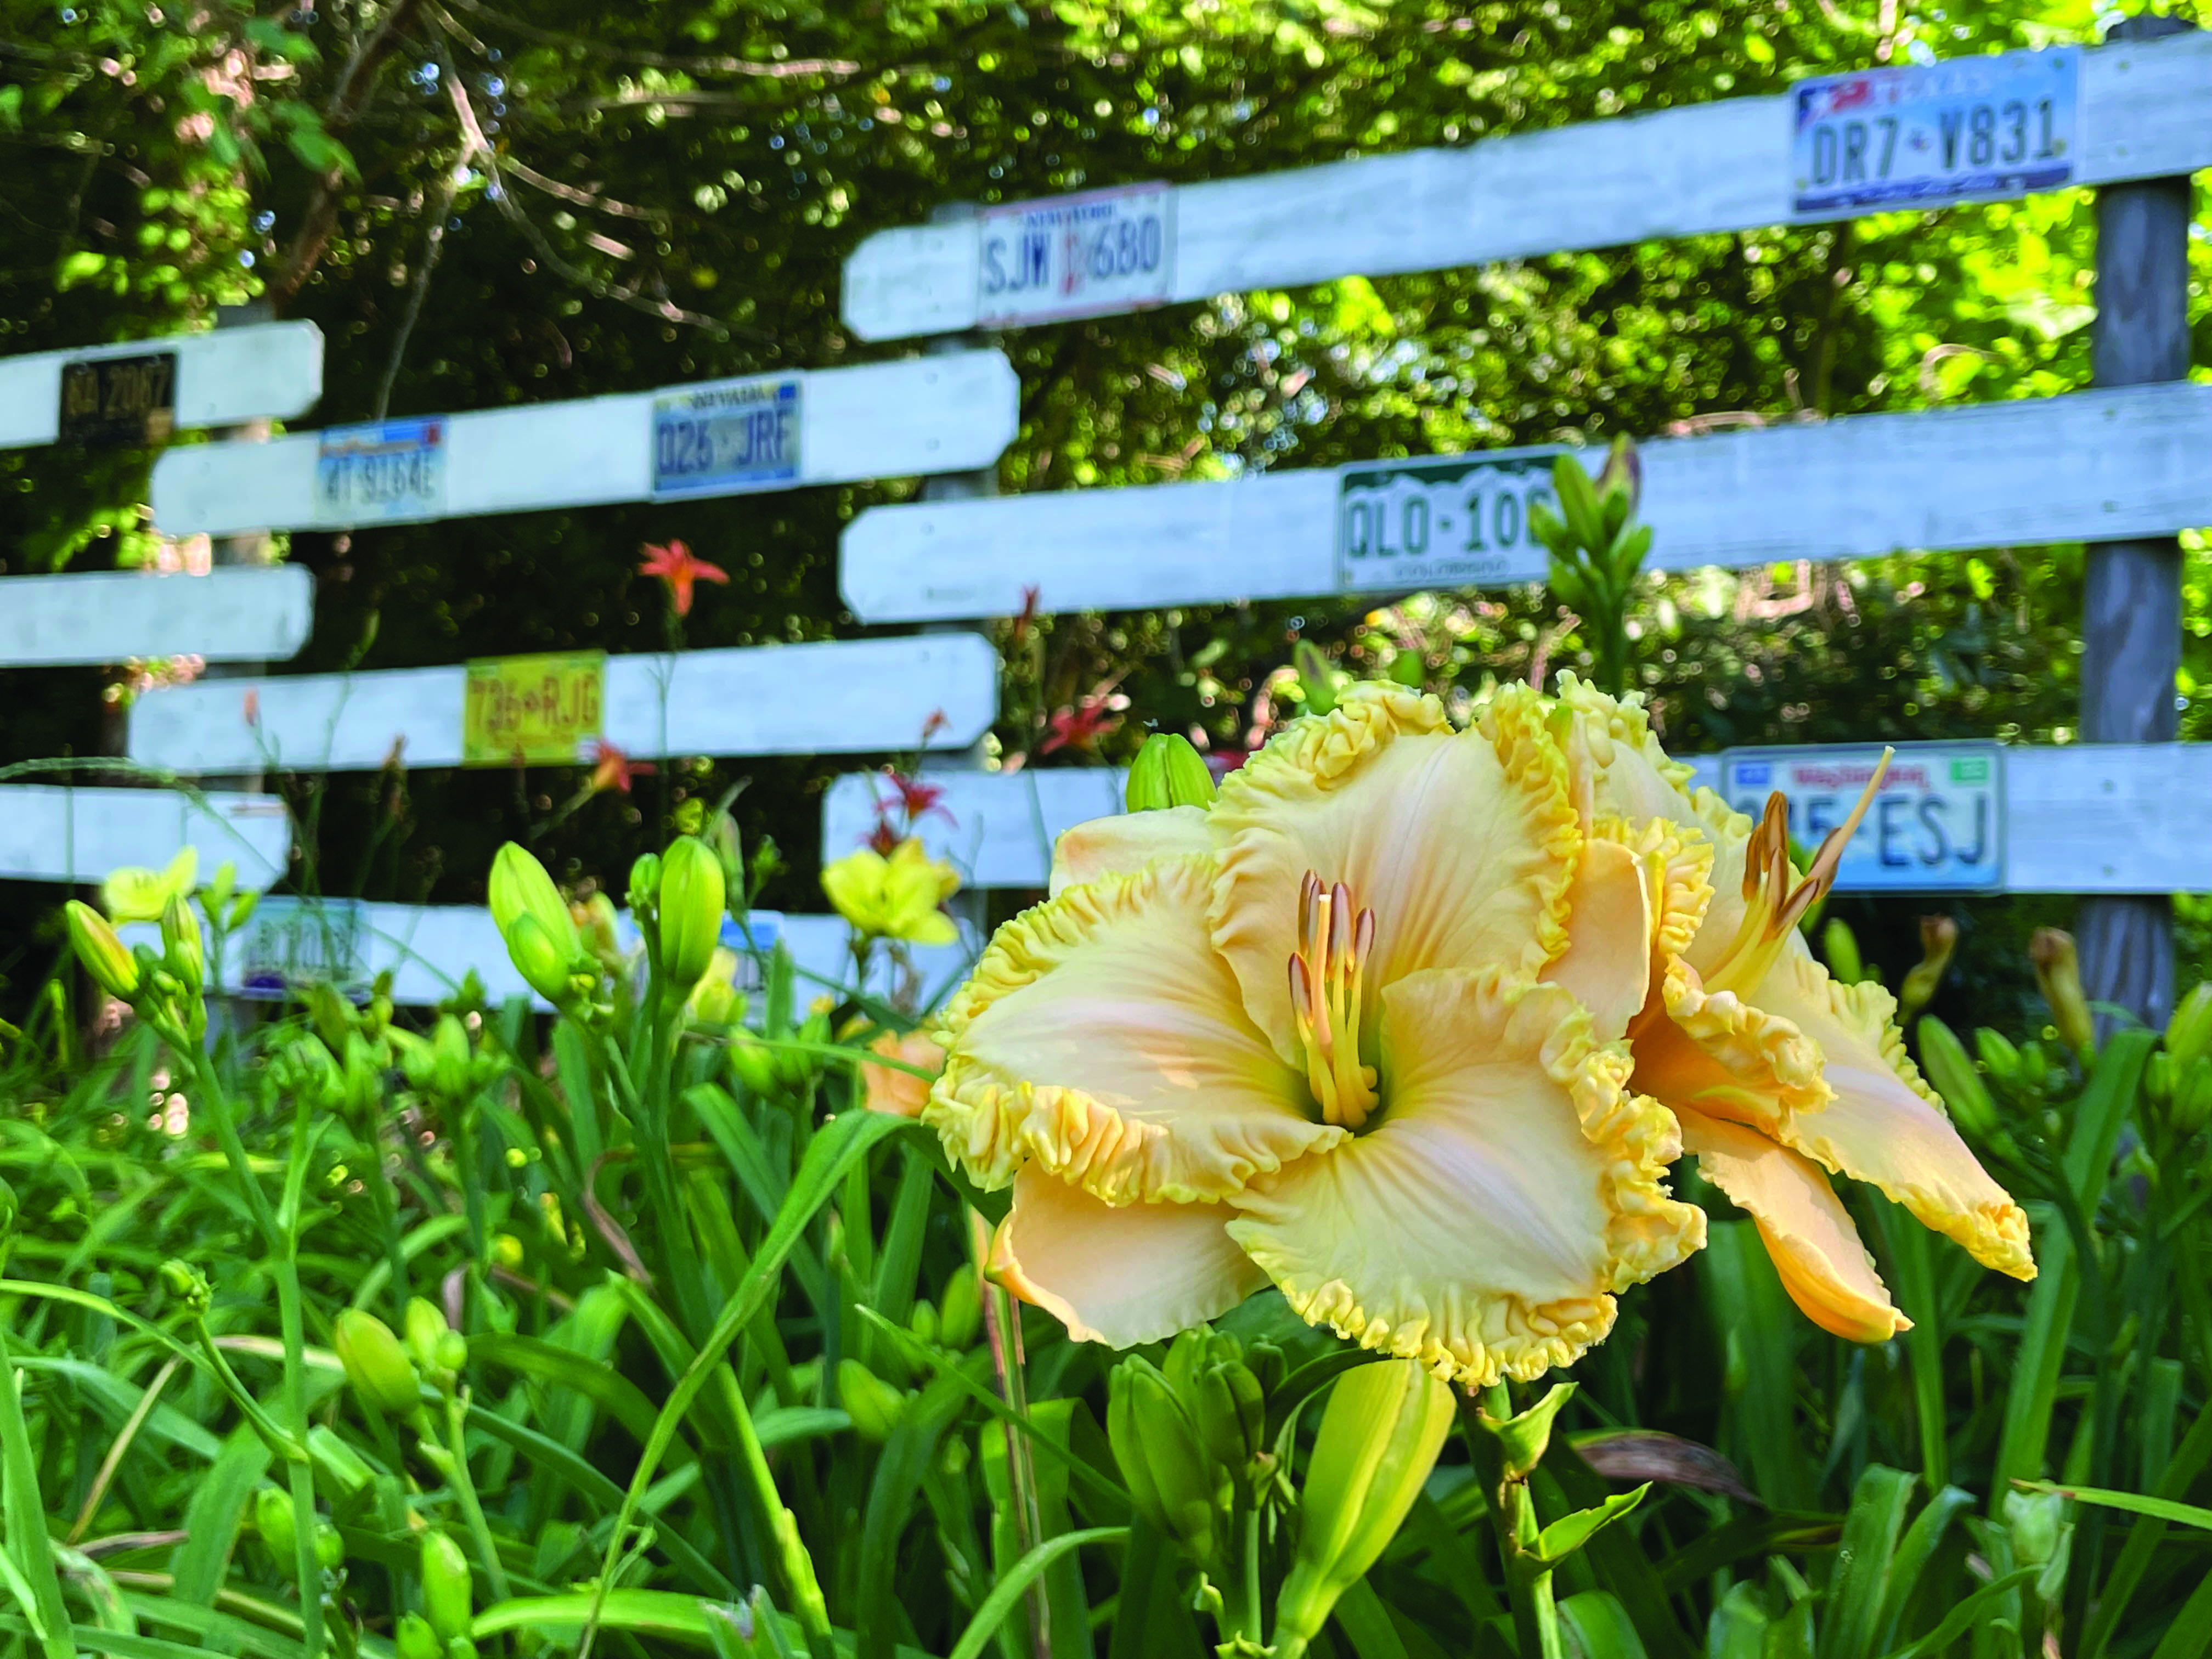 Willow Rock Gardens is home to more than 4,500 varieties of daylilies.